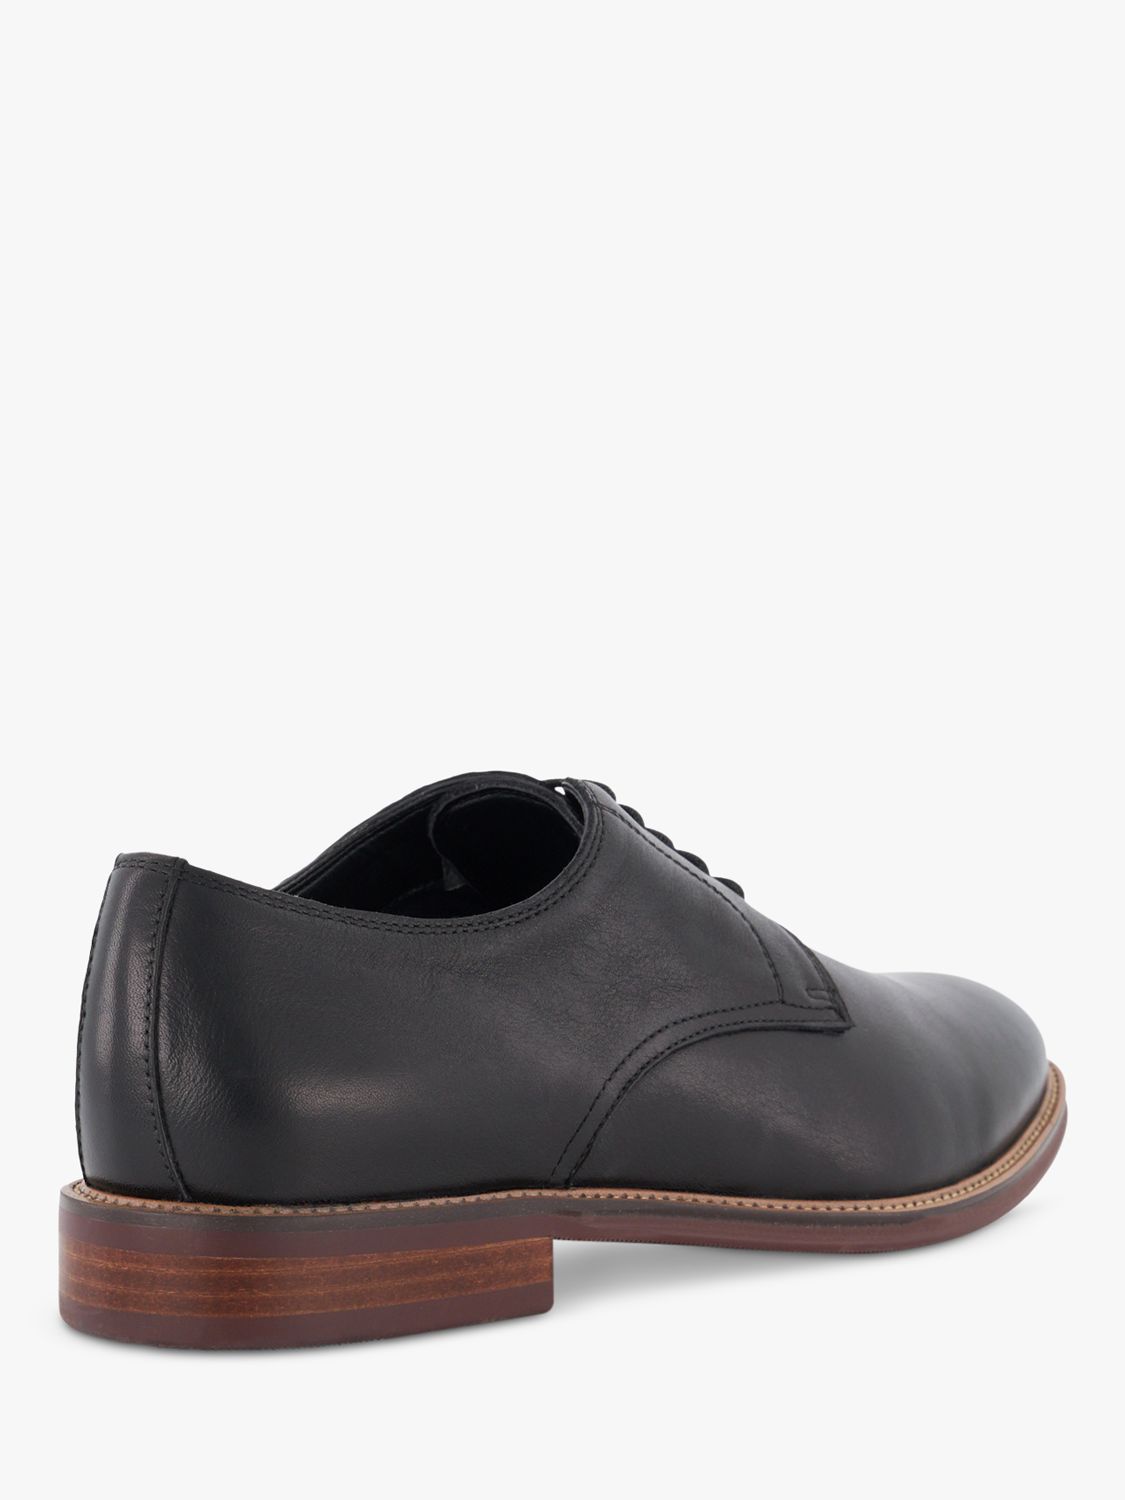 Dune Wide Fit Stanley Leather Lace-Up Shoes, Black, 9